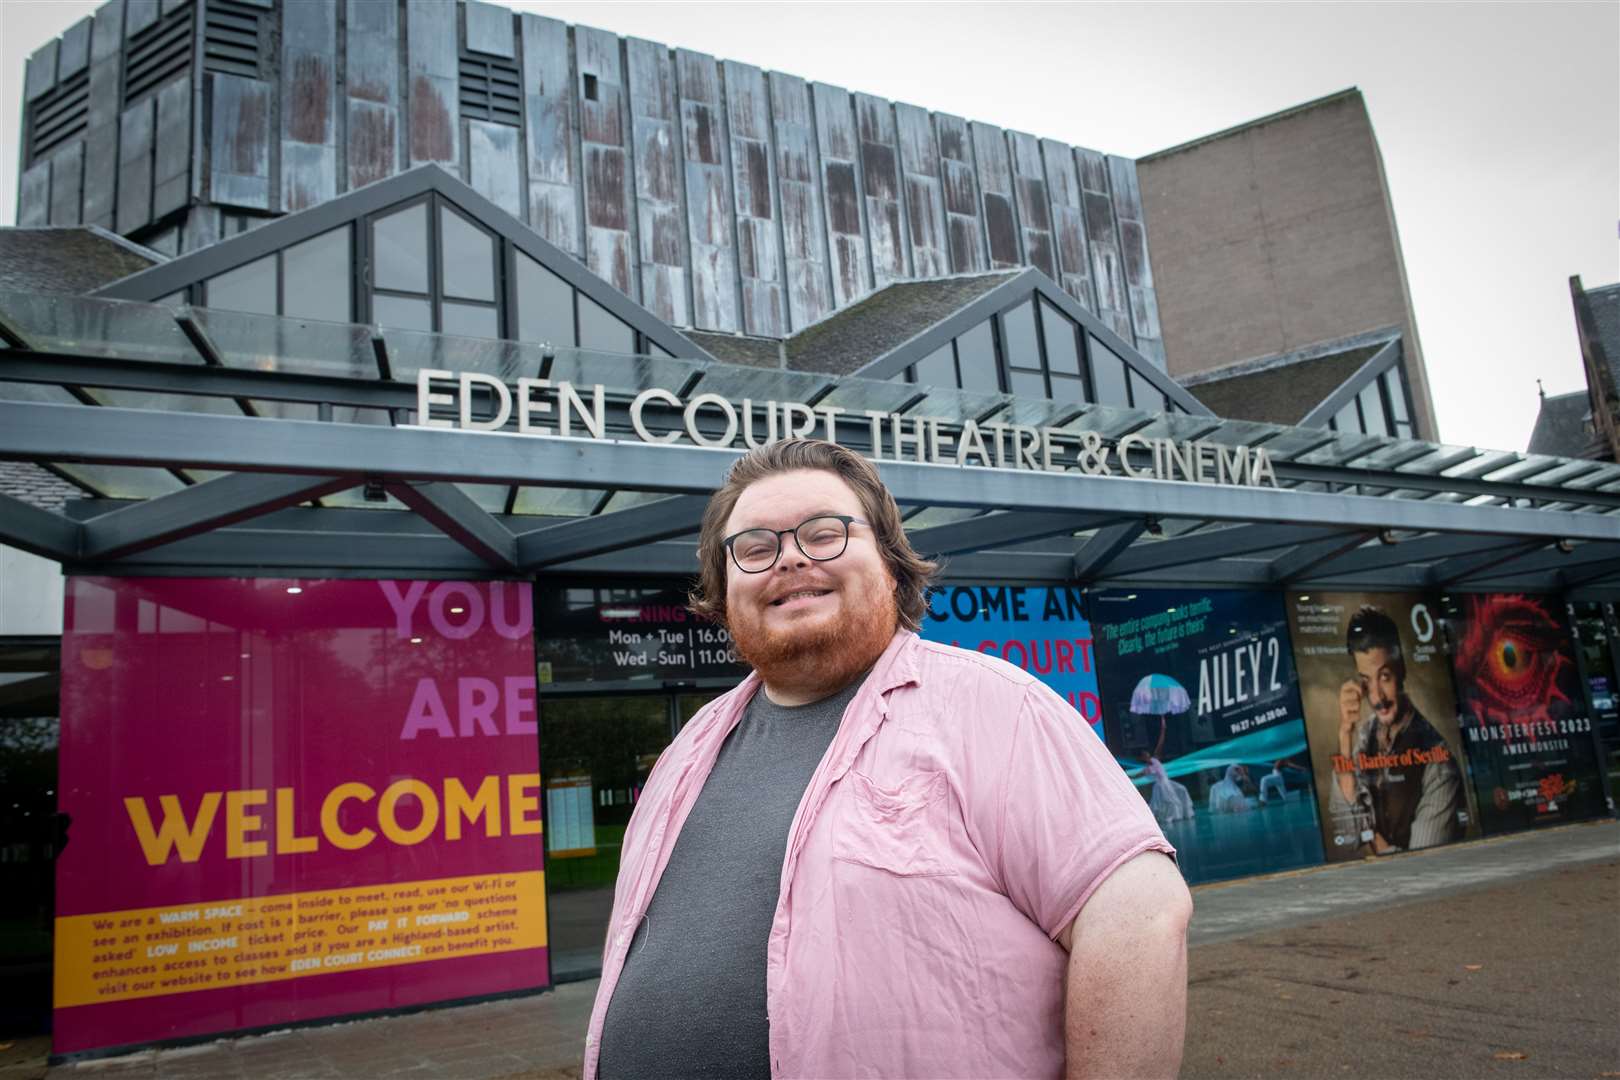 Eddy MacKenzie set out on his performing career in Inverness including appearing at Eden Court Theatre. Picture: Callum Mackay.